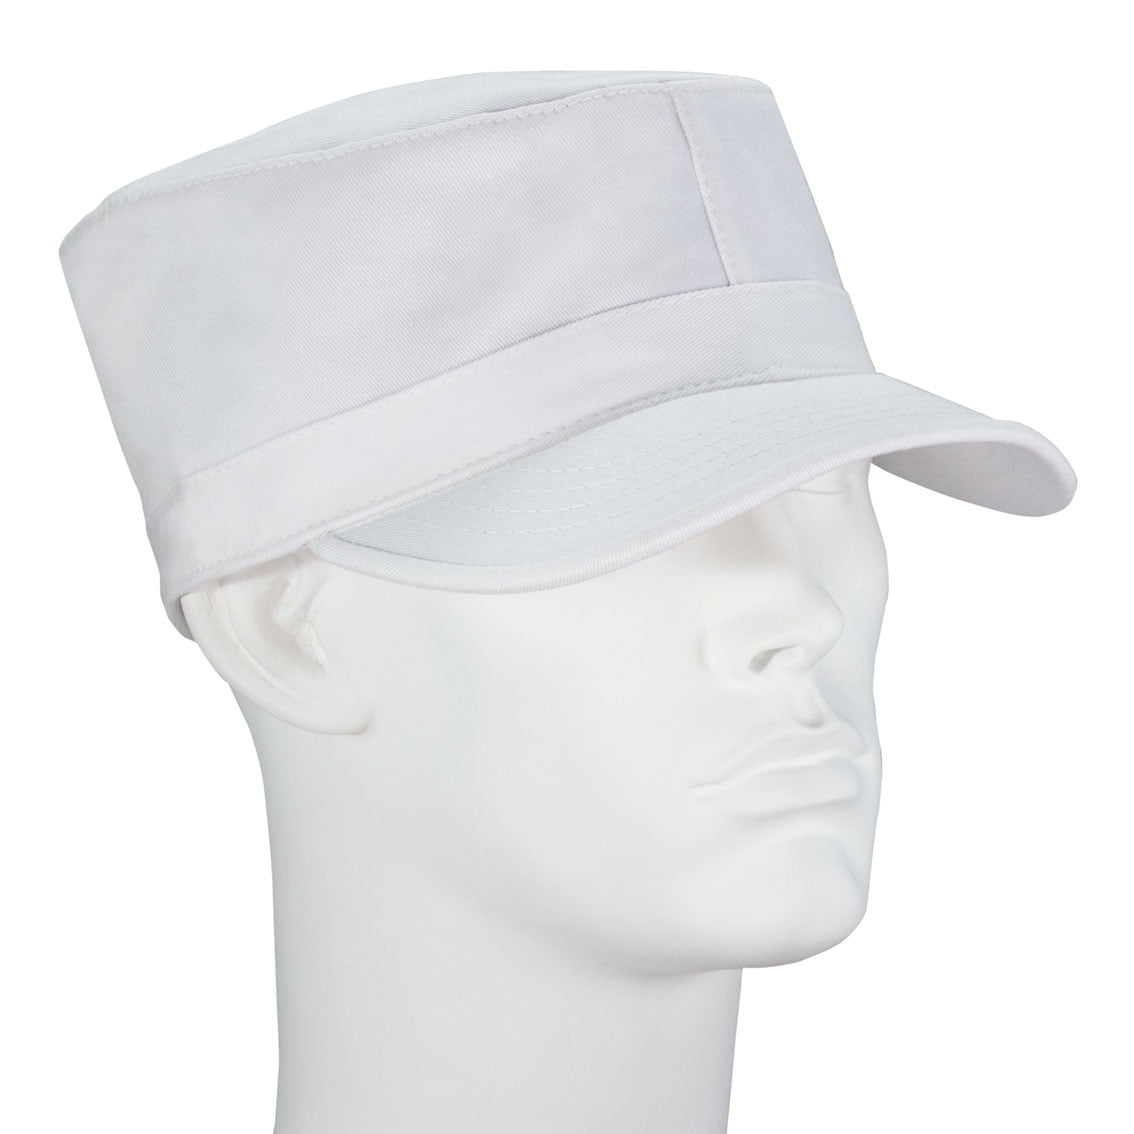 1pc White Plain Castro Military Fatigue Army Hat - Fitted - Unconstructed - 100% Cotton